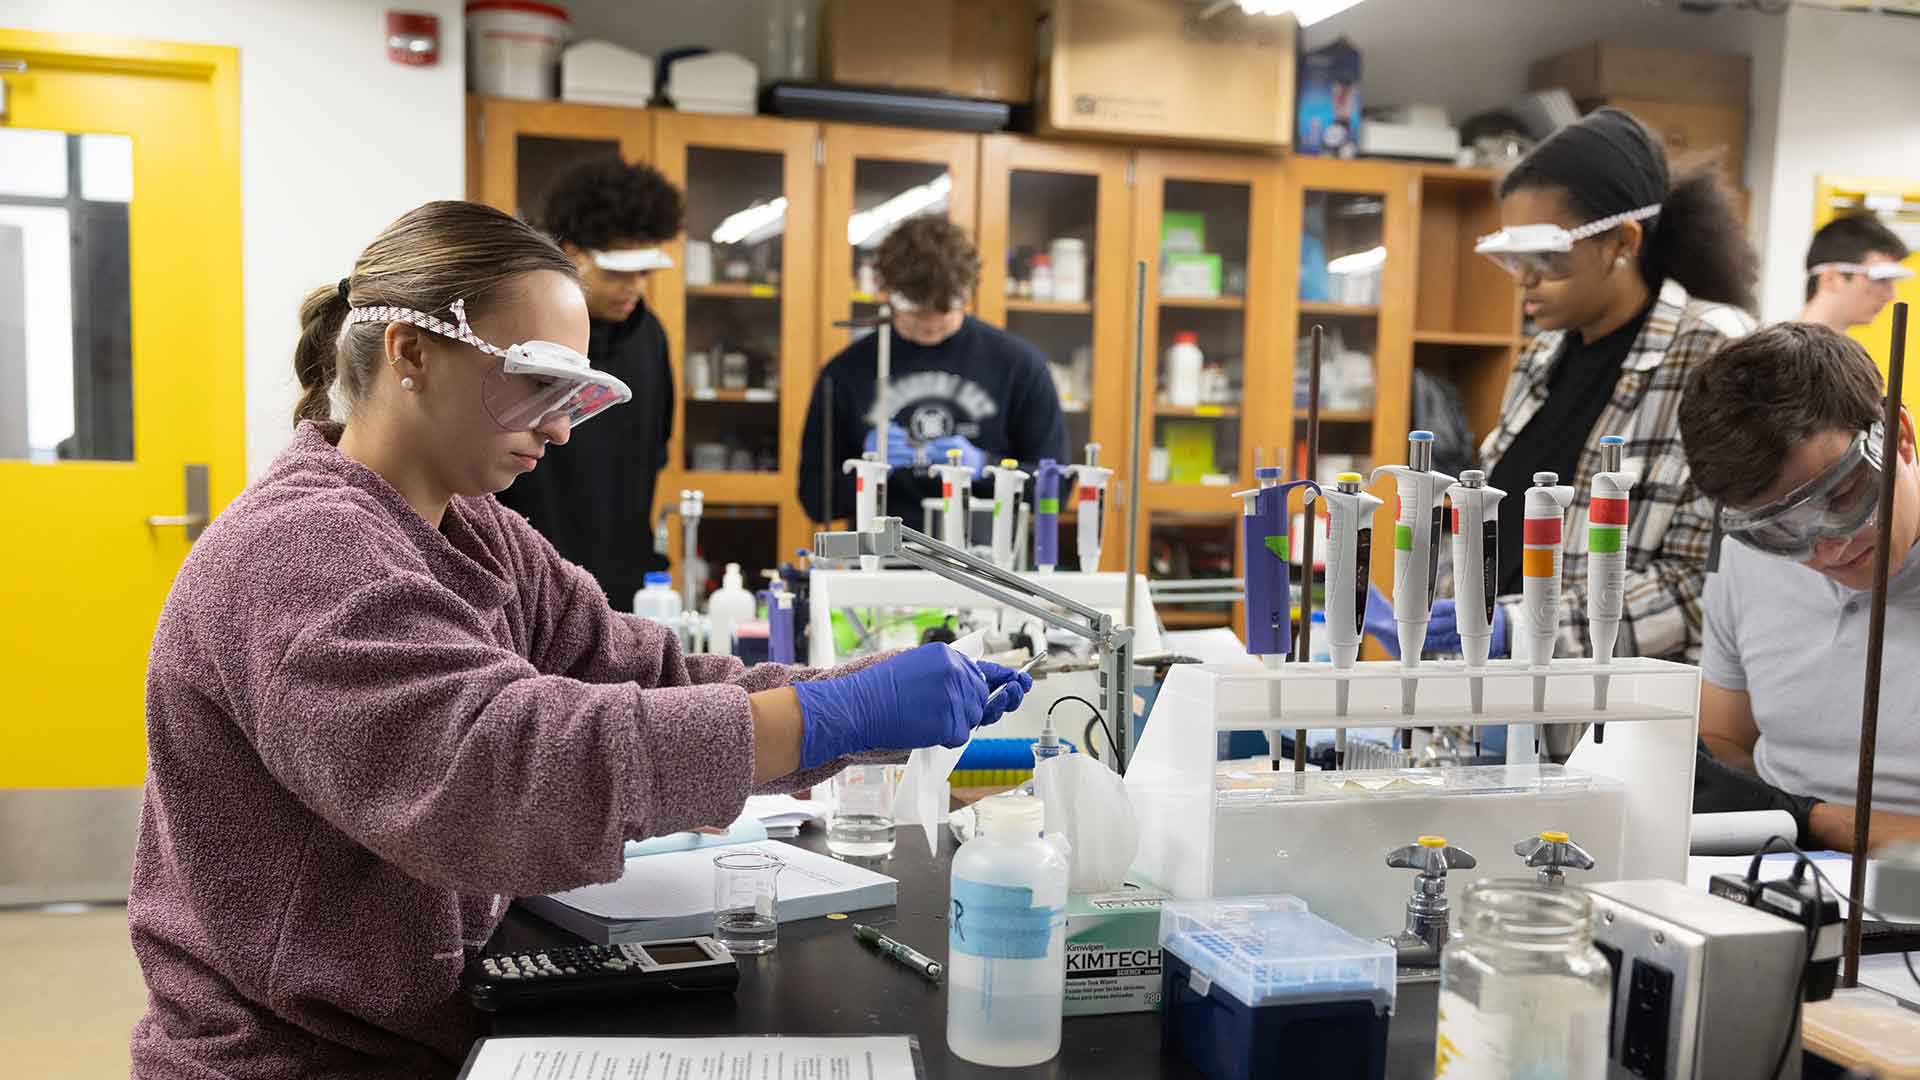 Chemistry students using equipment during a lab class.